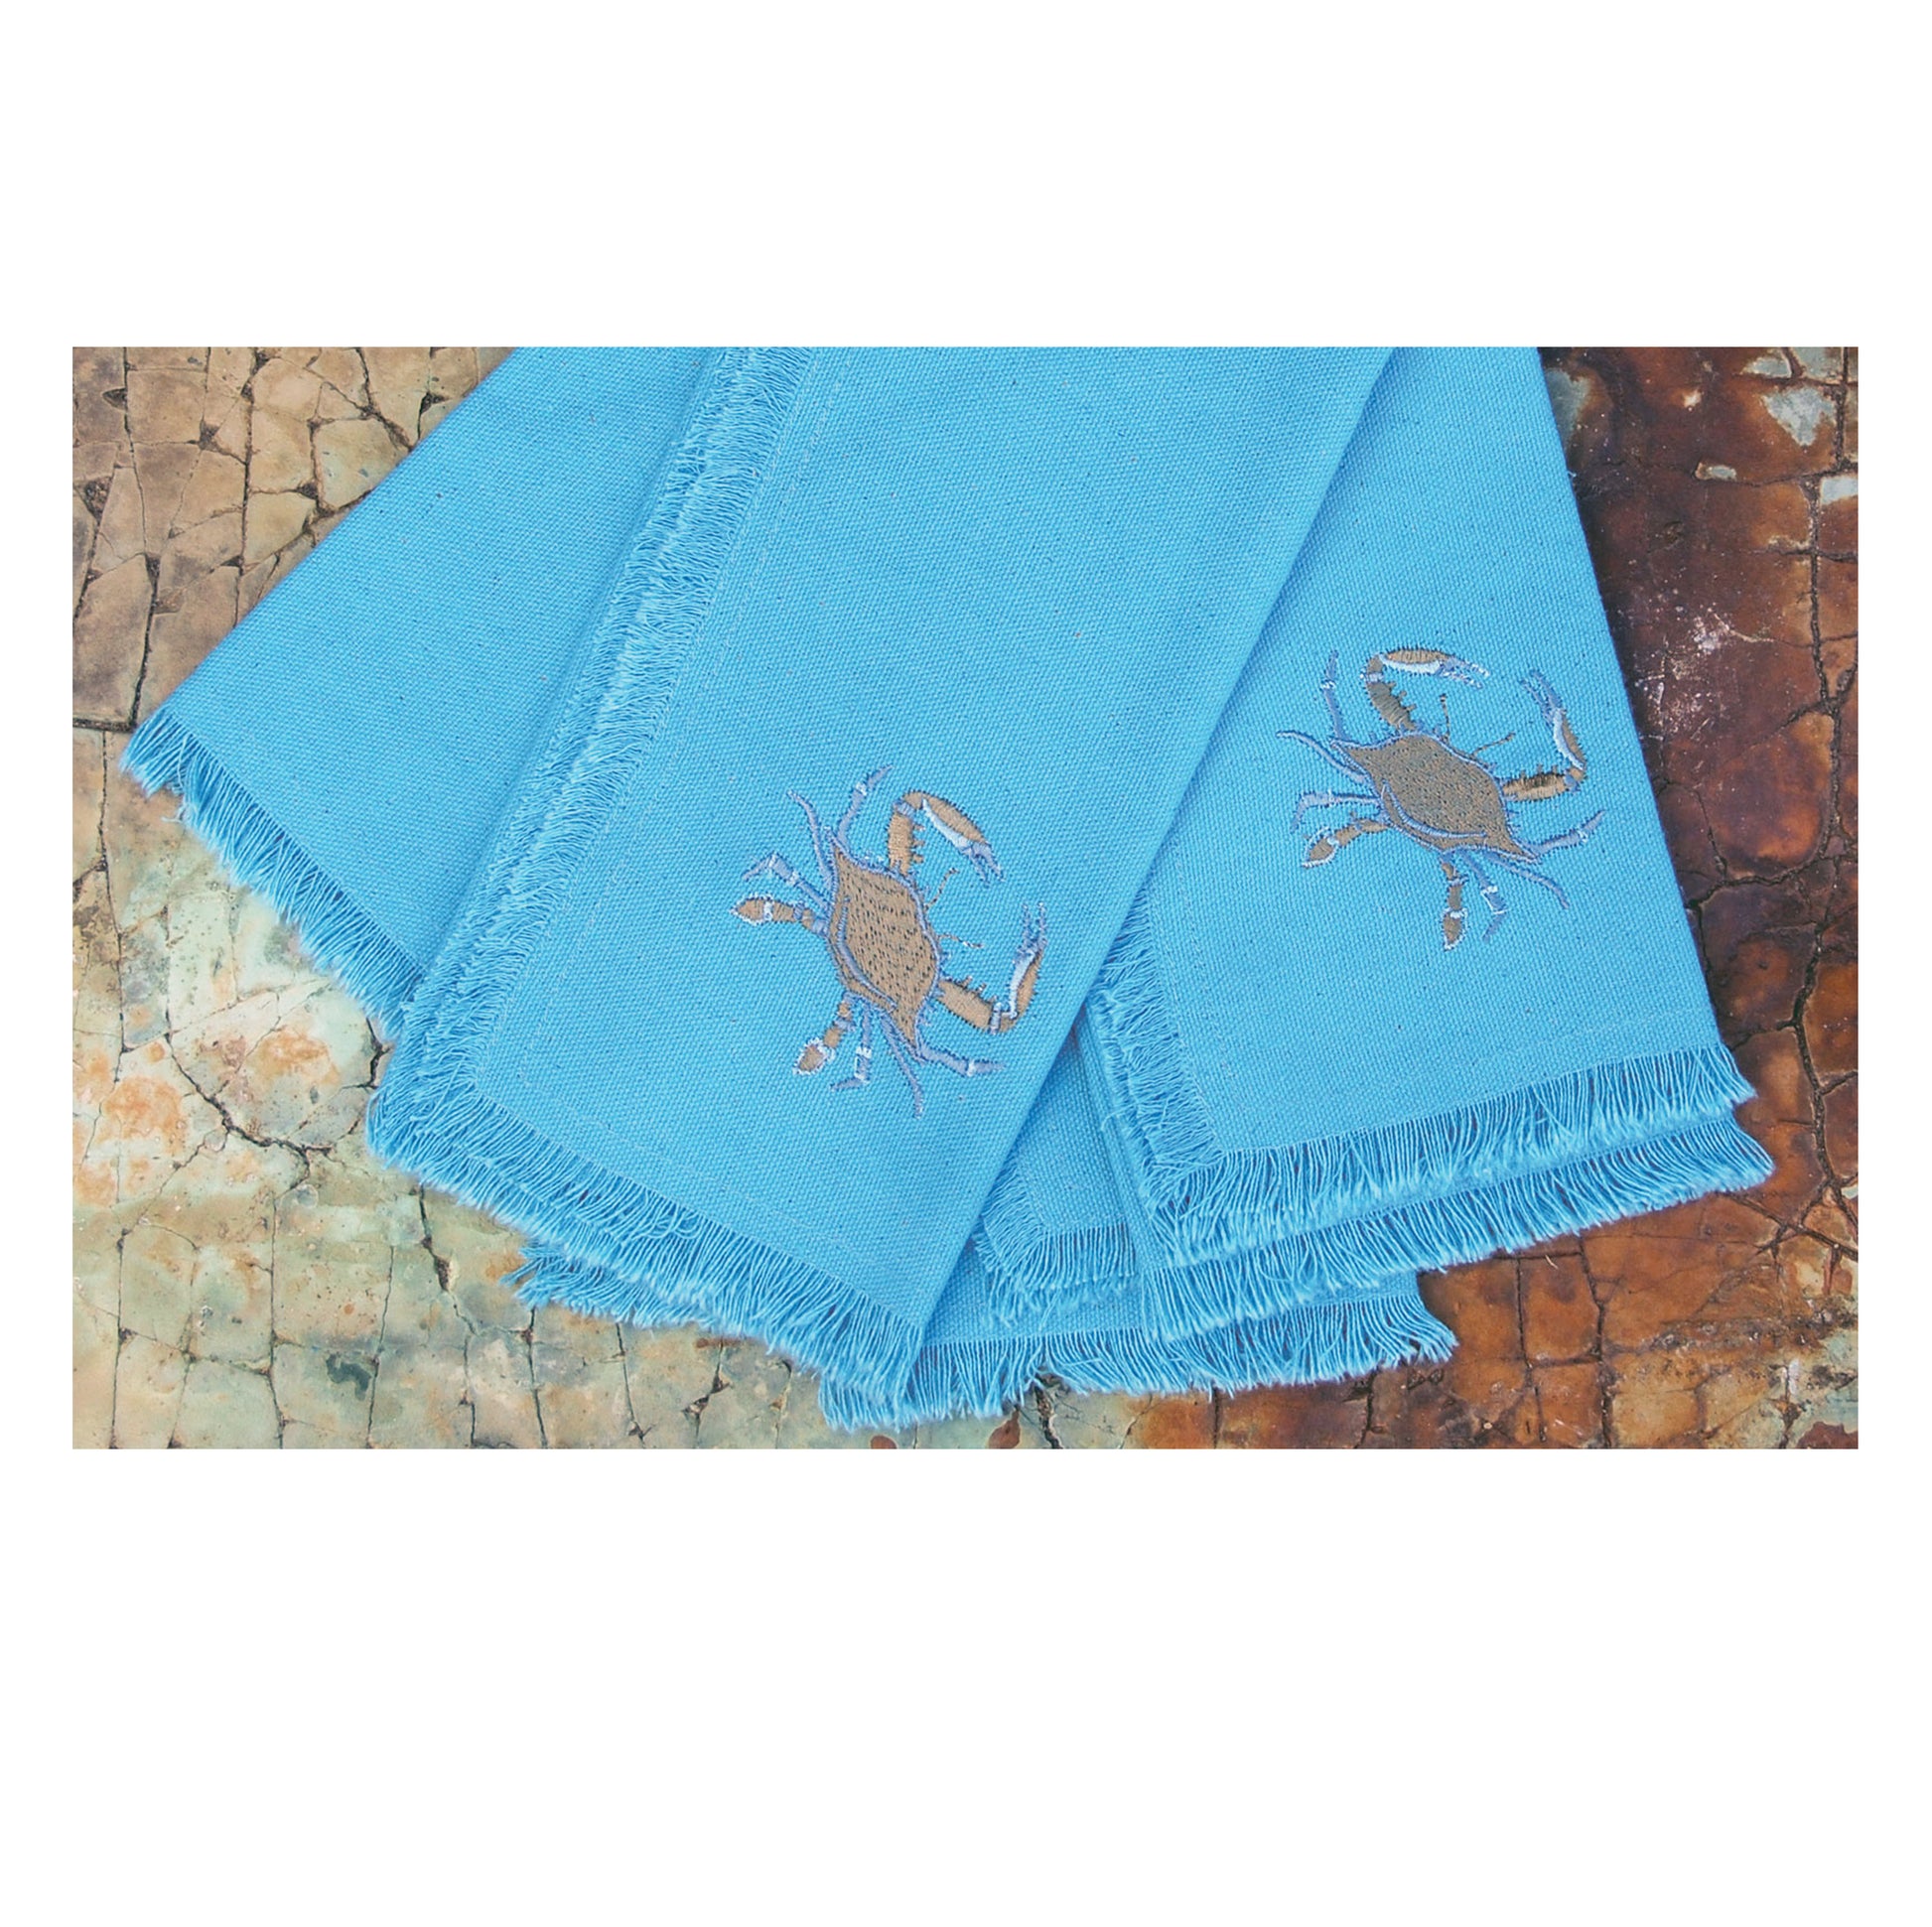 Blue crab embroidered on a coastal blue cotton napkin with fringe set of 4 stacked.